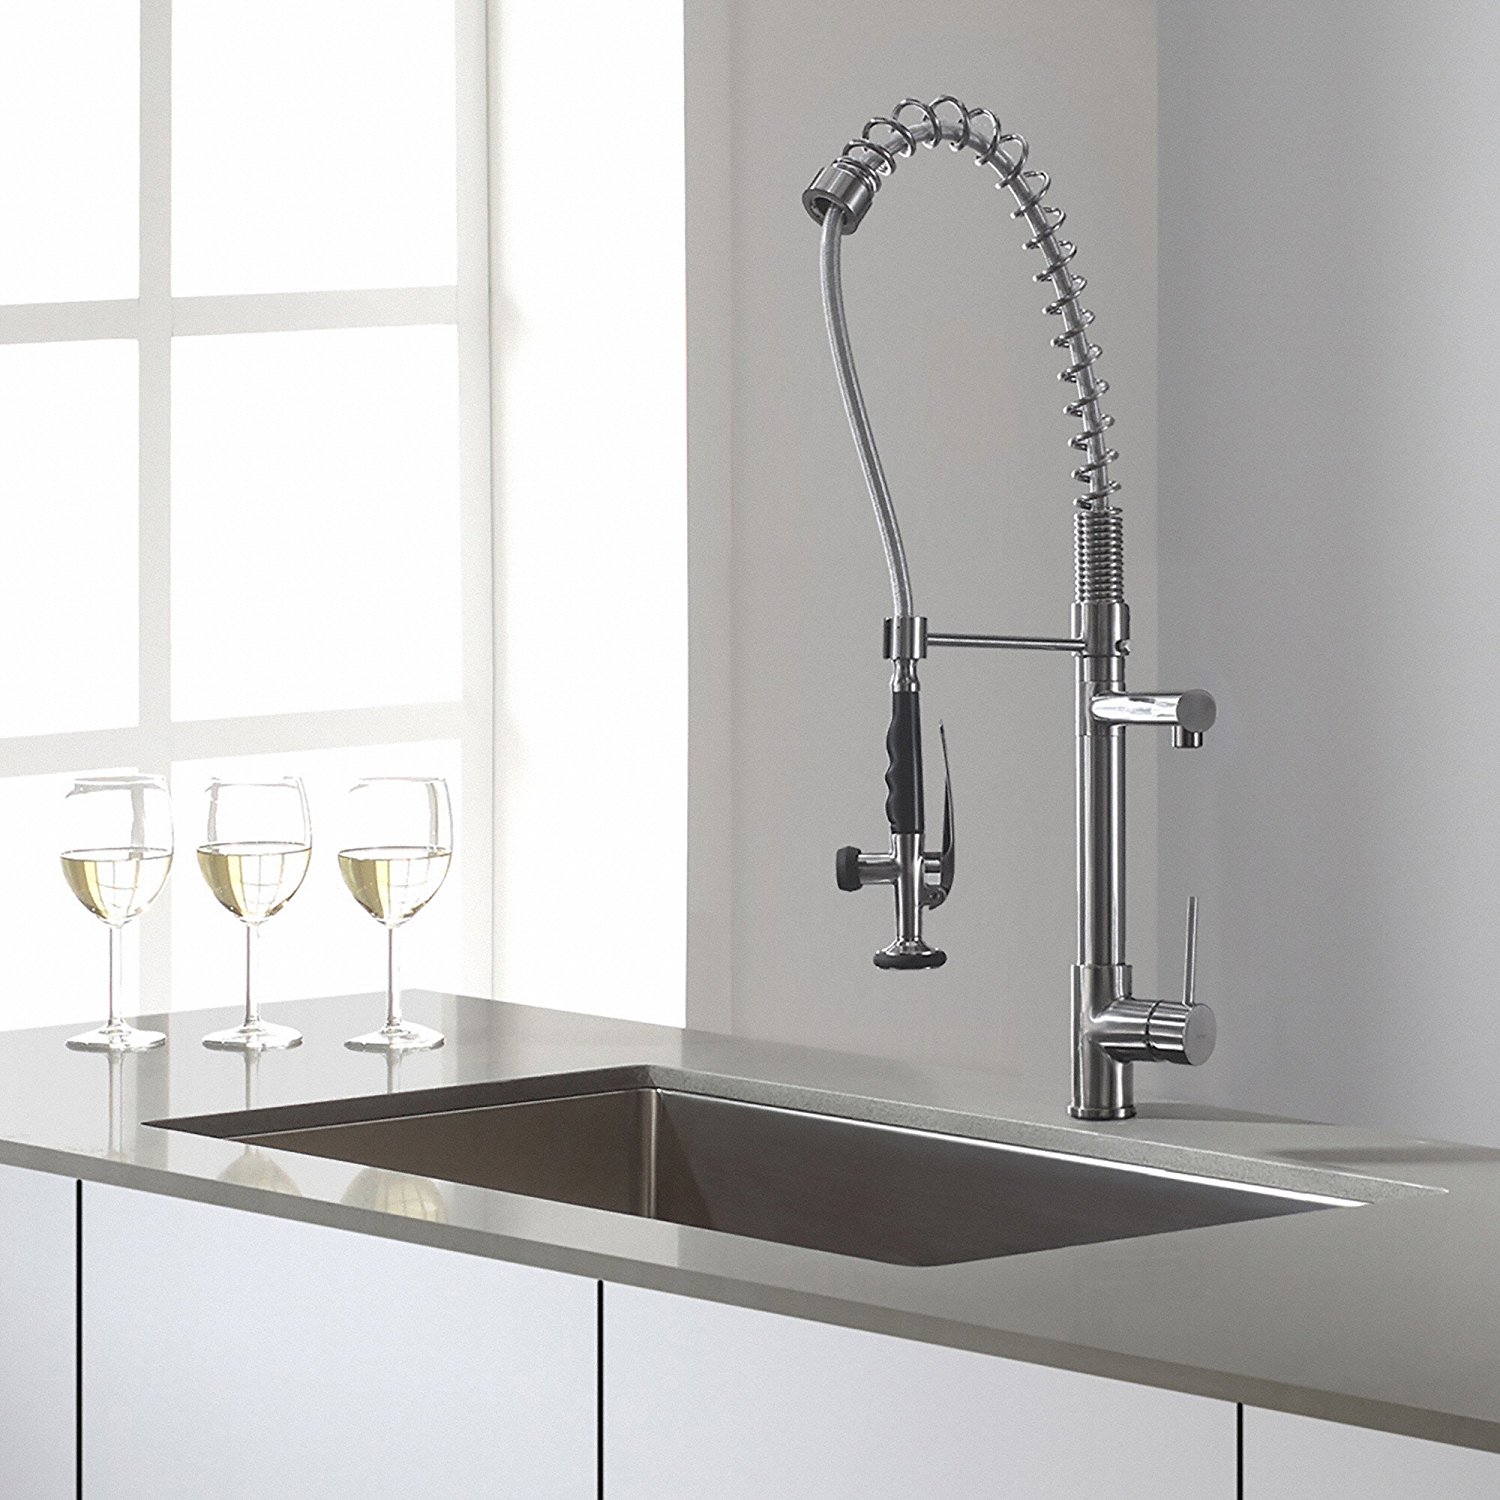 Kraus KPF-1602 Single Handle Pull Down Kitchen Faucet Commercial Style Pre-rinse in Chrome